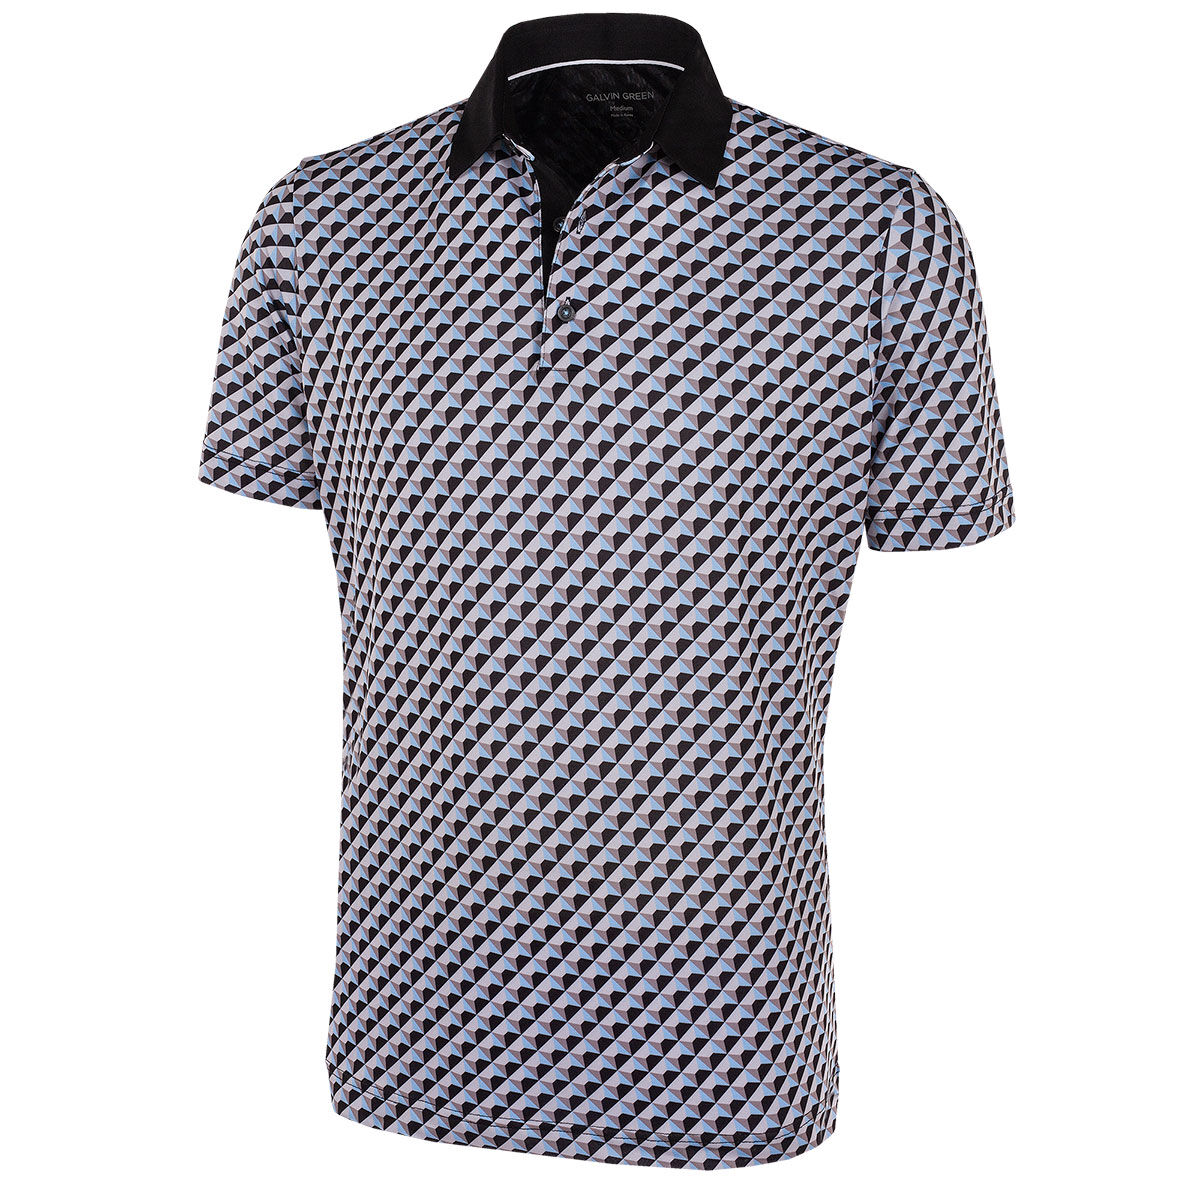 Galvin Green Black, Blue and Grey Men’s Mercer Golf Polo Shirt, Size: Small | American Golf